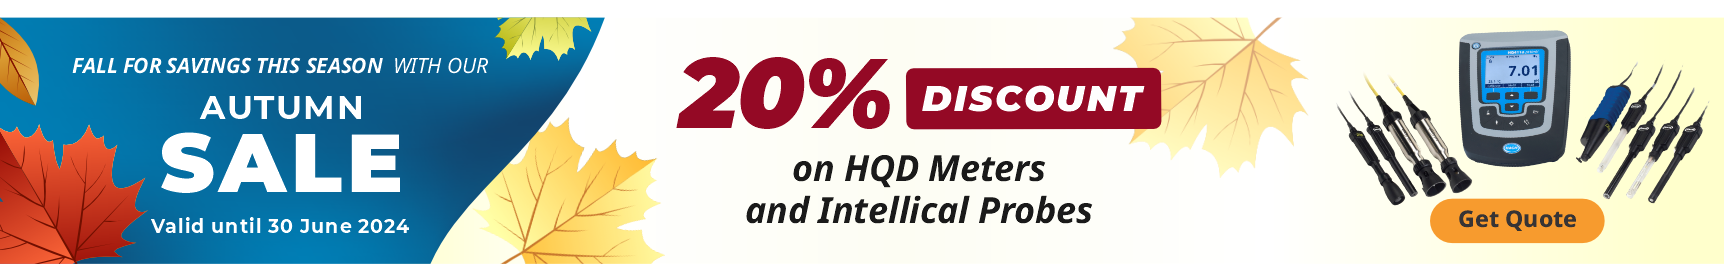 HQD-Intellical-Probes_Promotion_Carousel_Banner